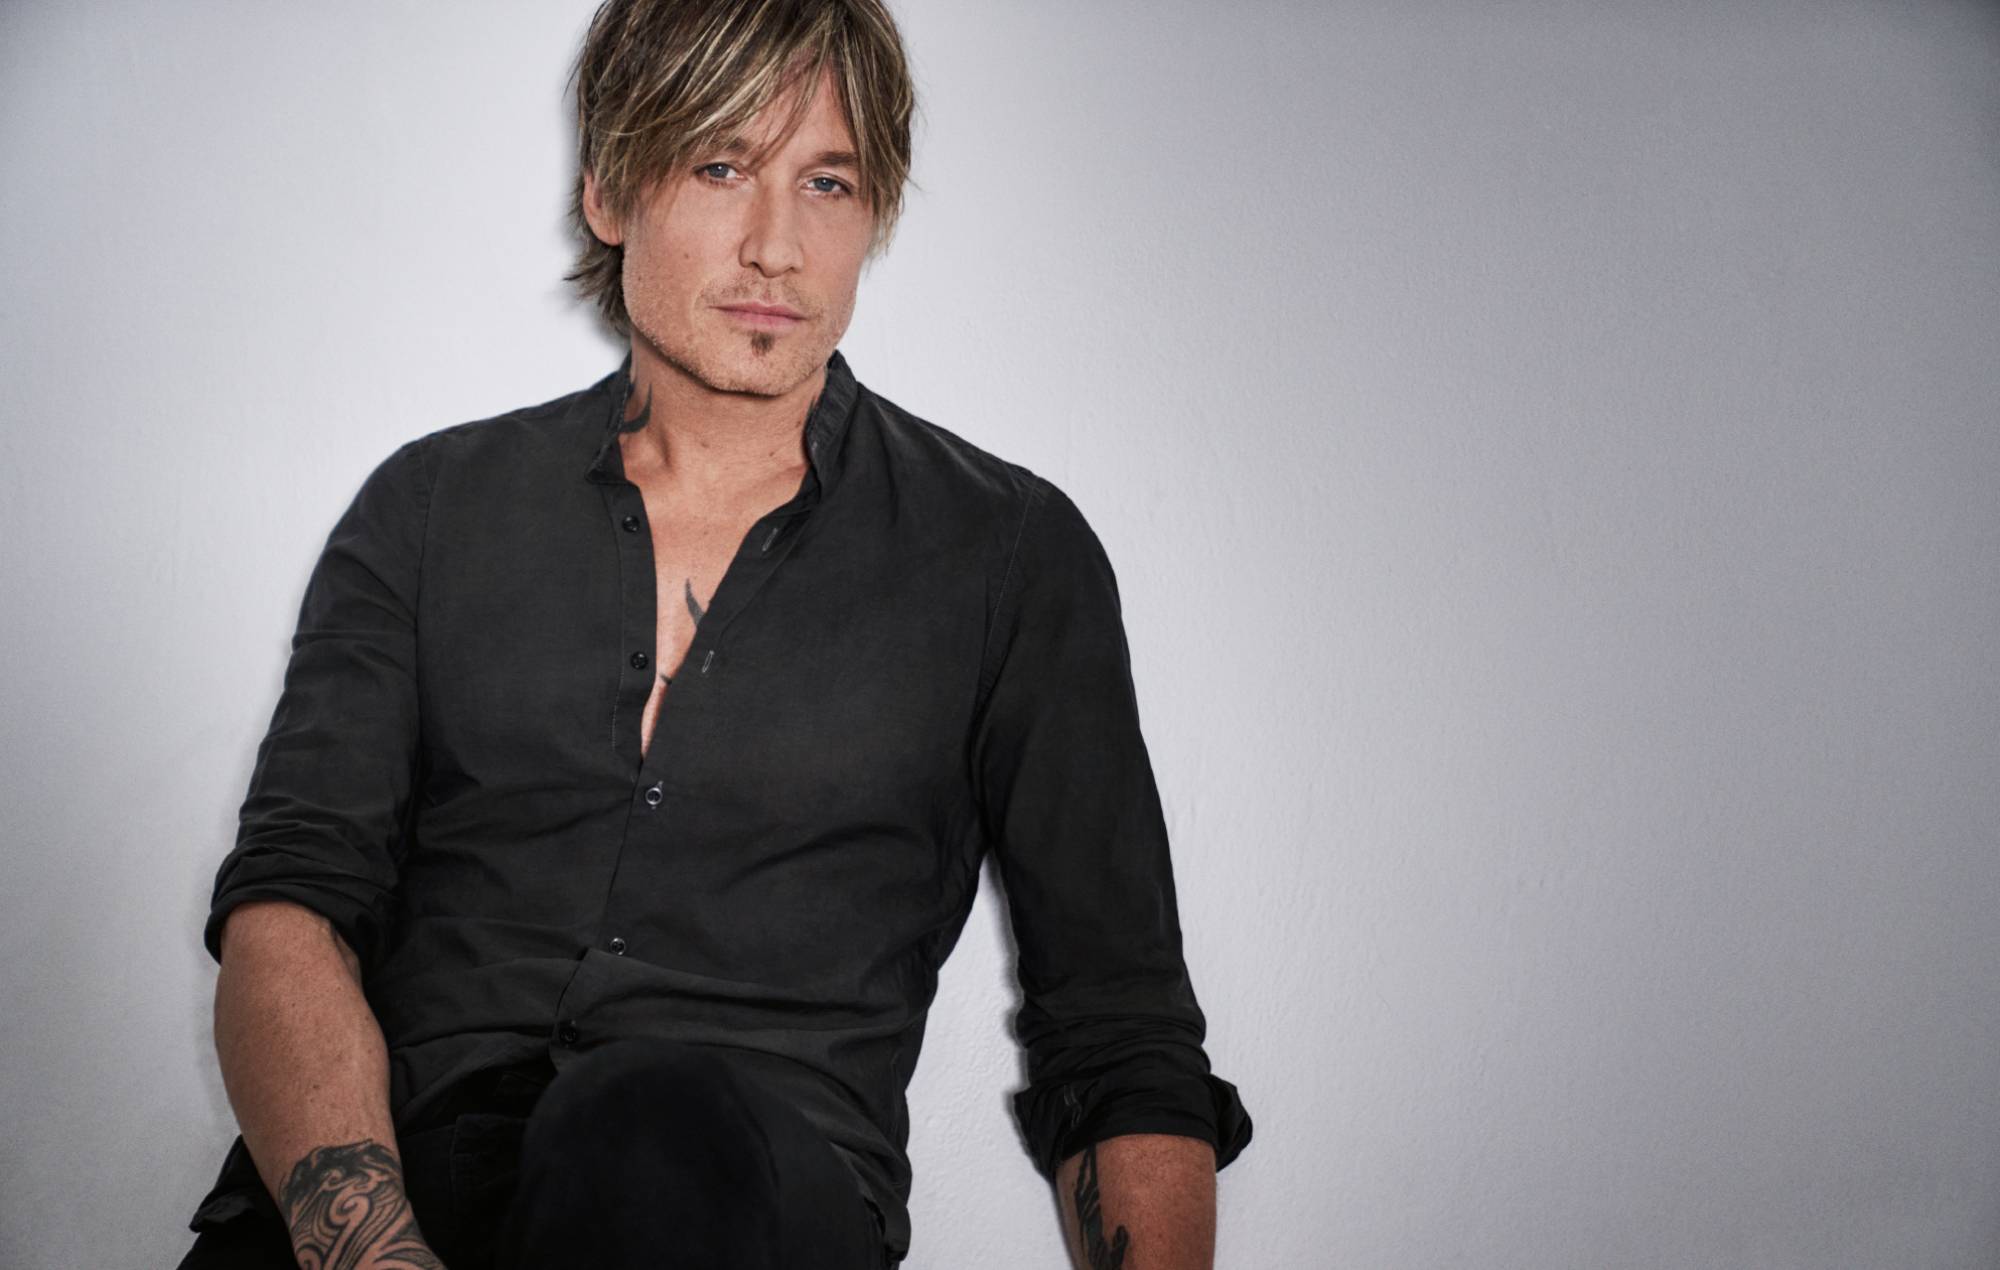 Five things we learned from our In Conversation video chat with Keith Urban